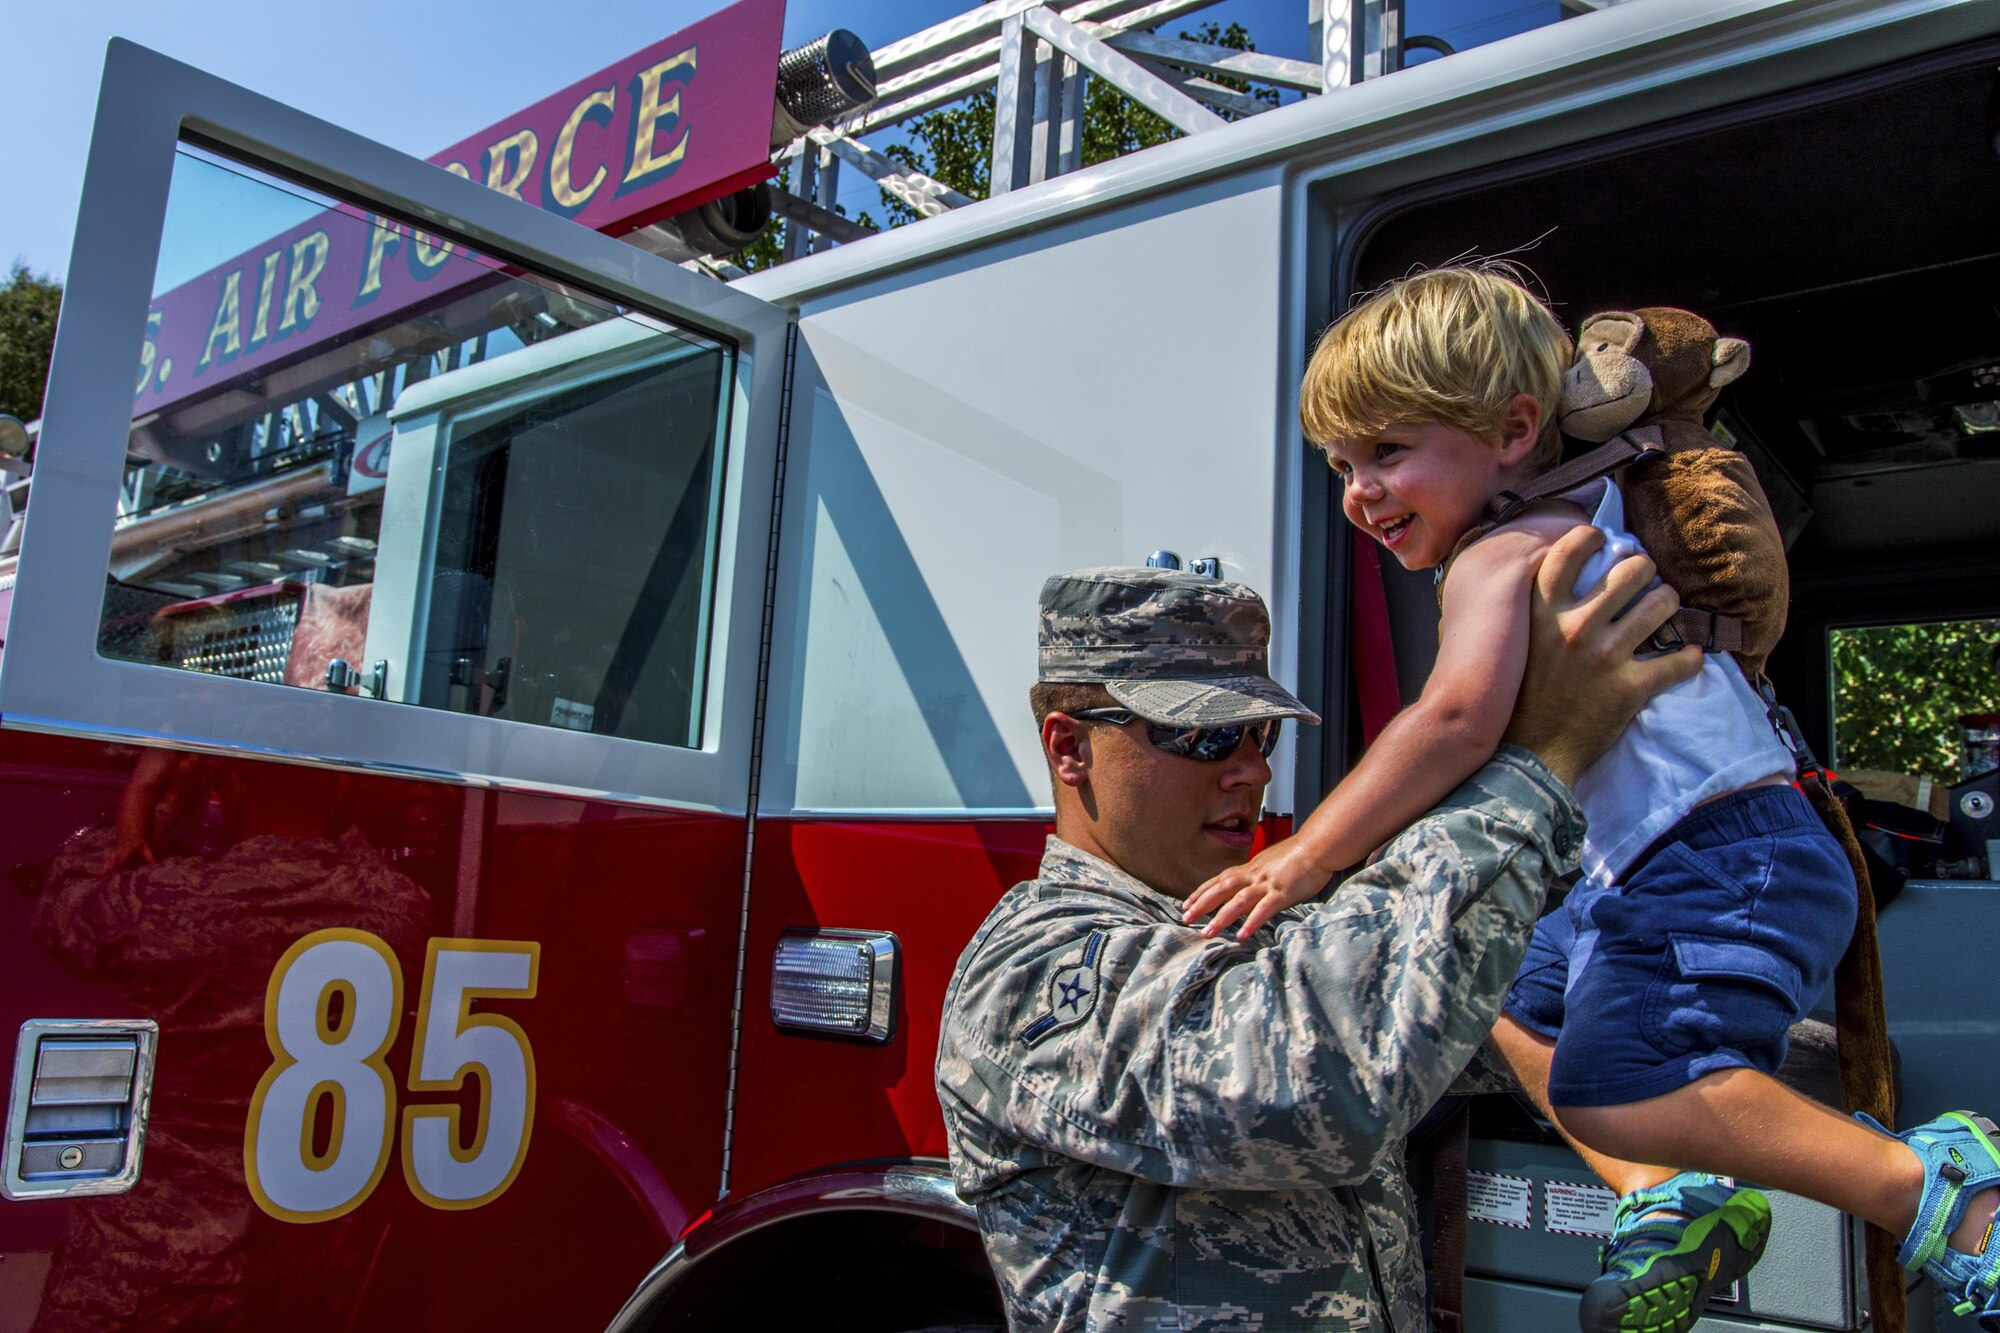 Airman Basic Bryce Postle, 445th Airlift Wing journeyman firefighter, helps a toddler out of a fire engine during Big Truck Day, July 28, Destin, Fla. A 96th Civil Engineer Group fire engine was on display and firefighters educated the community about fire safety. Fire, construction, garbage and utility trucks were on display for kids to see up close at the city’s annual event. (U.S. Air Force photo/Kristin Stewart)